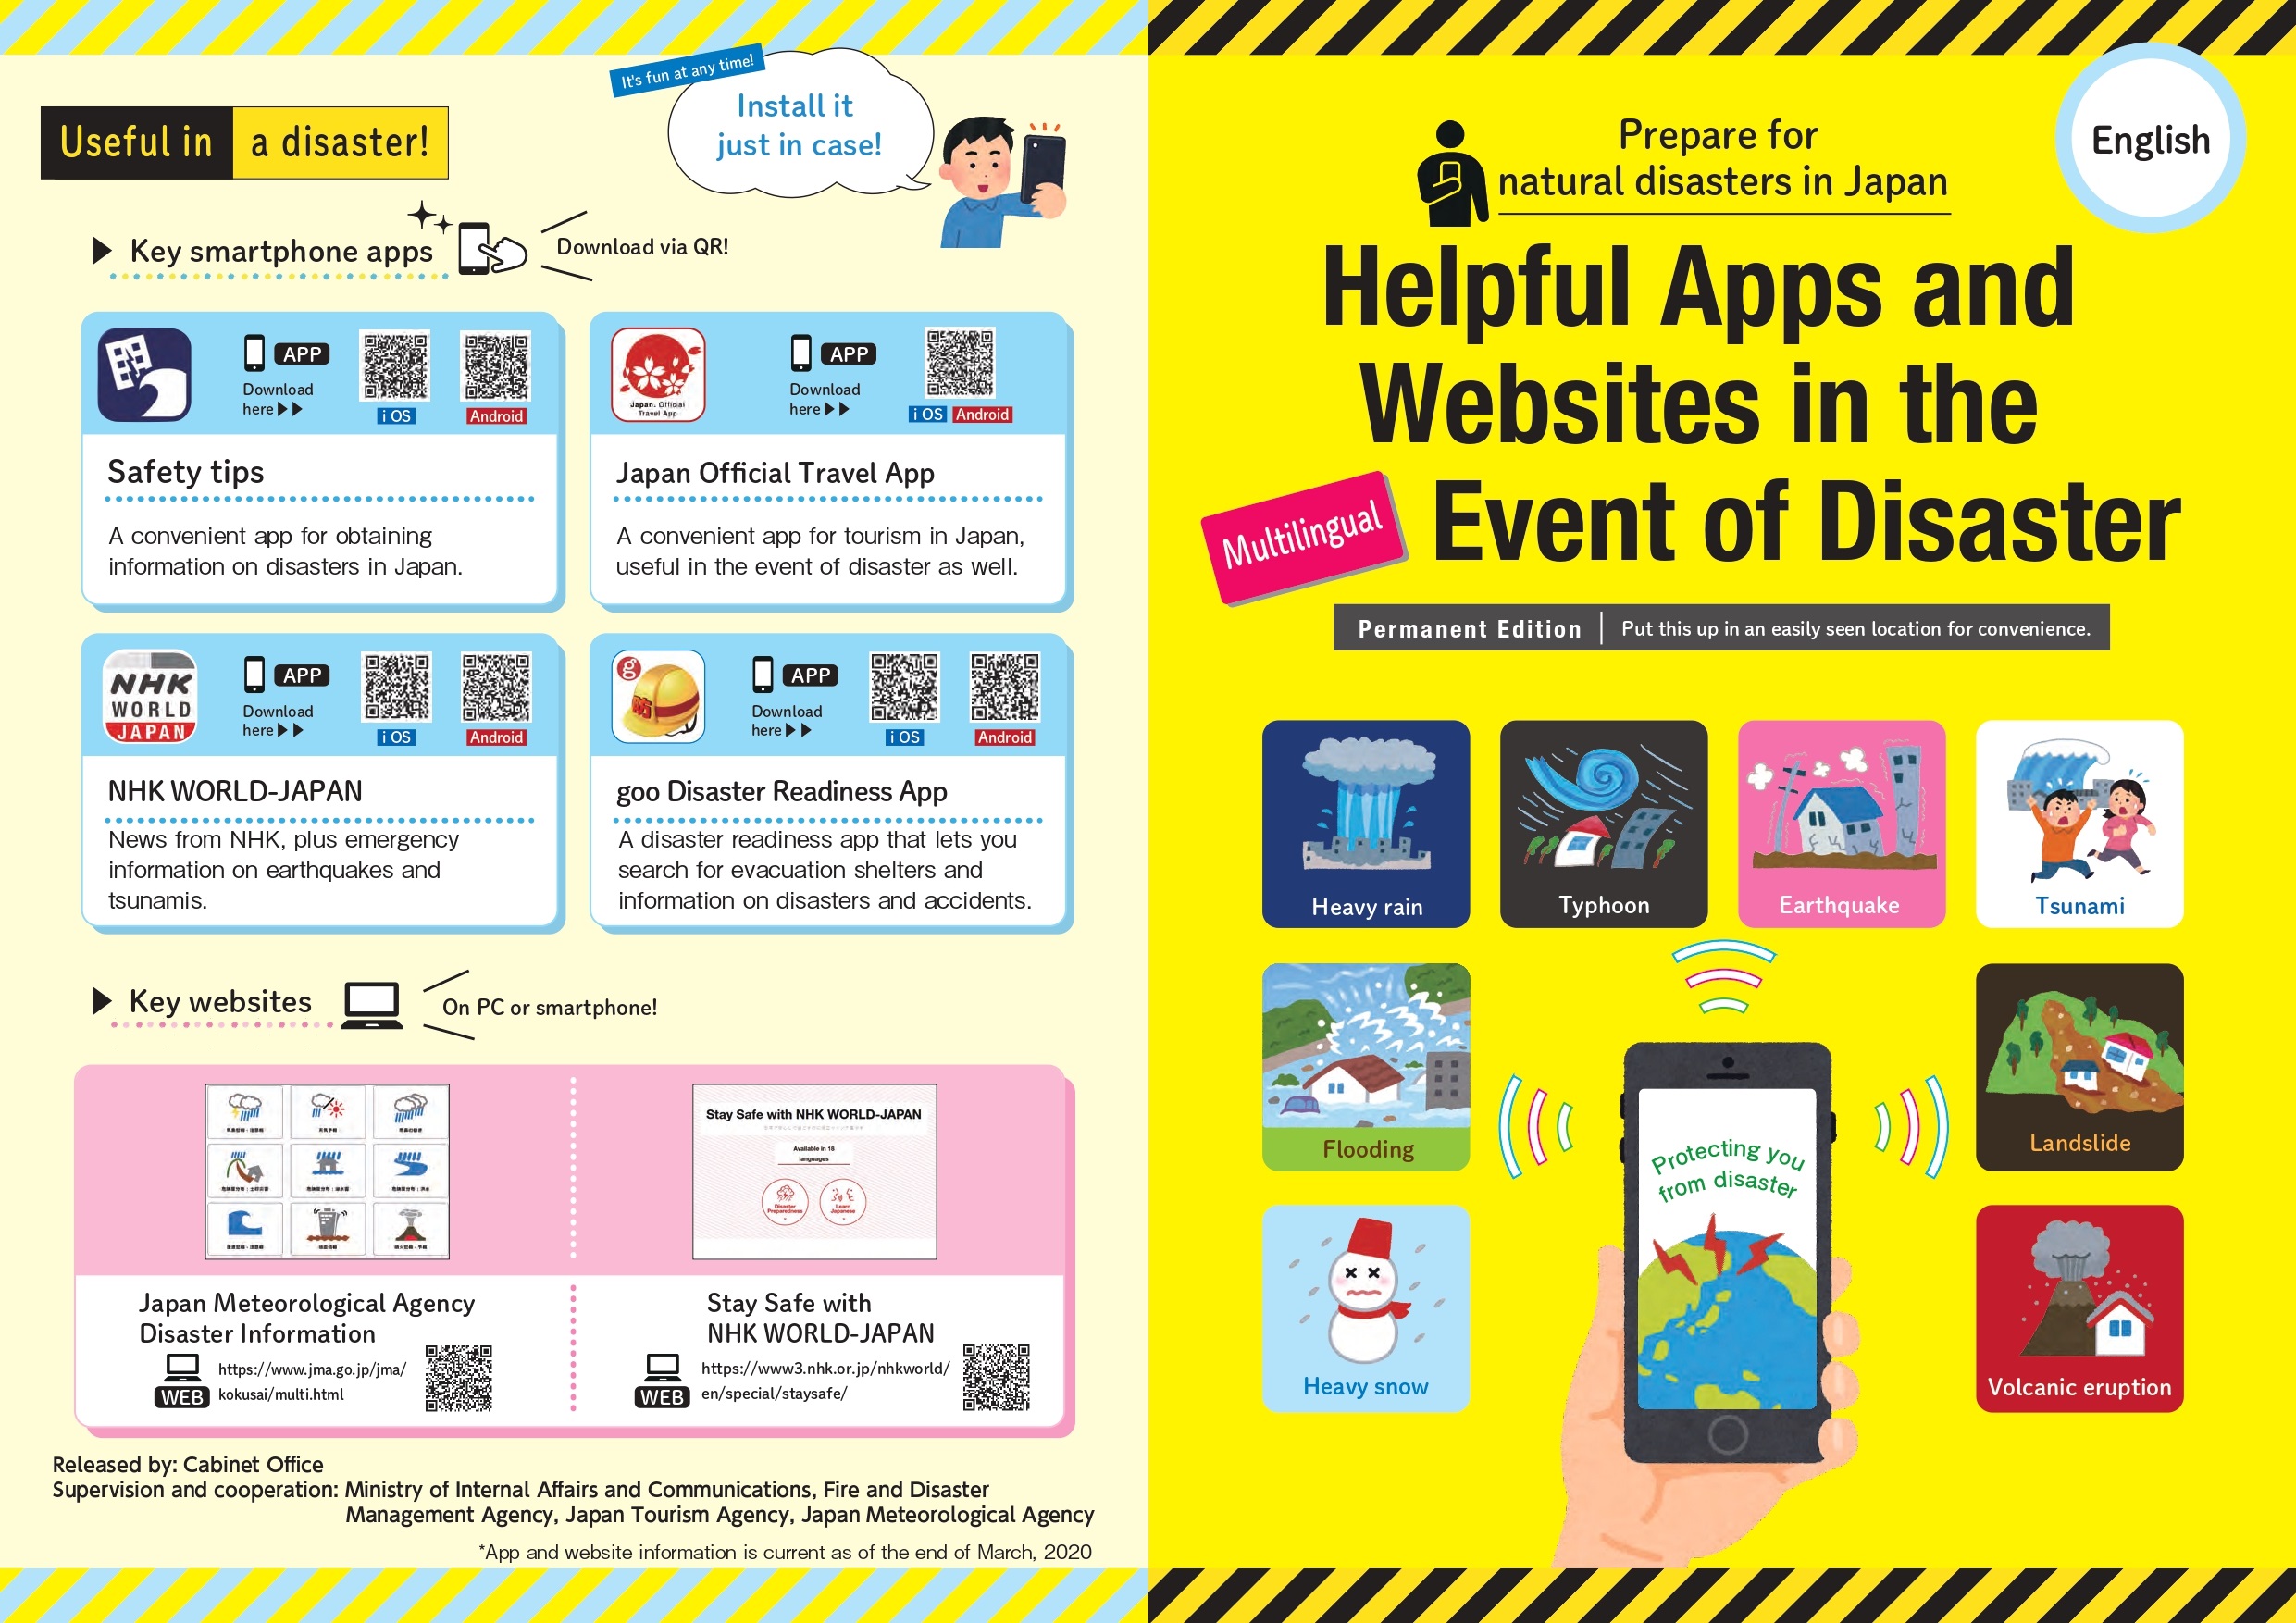 Helpful Apps and Websites in the Event of Disaster